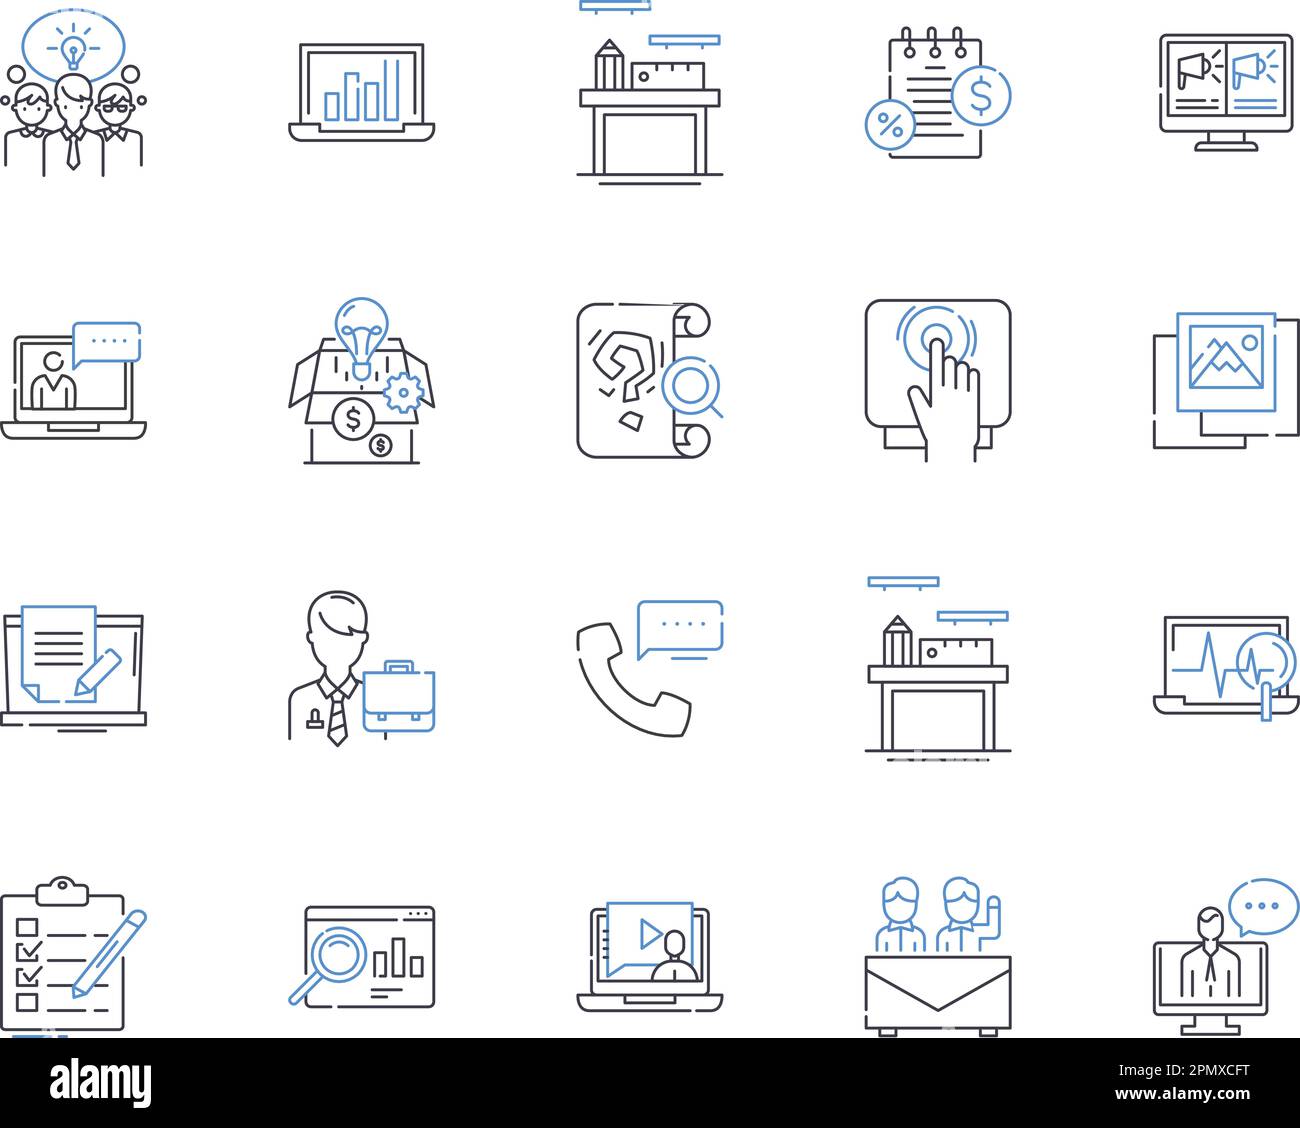 Company seminar outline icons collection. company, seminar, training, development, leadership, management, strategy vector and illustration concept Stock Vector